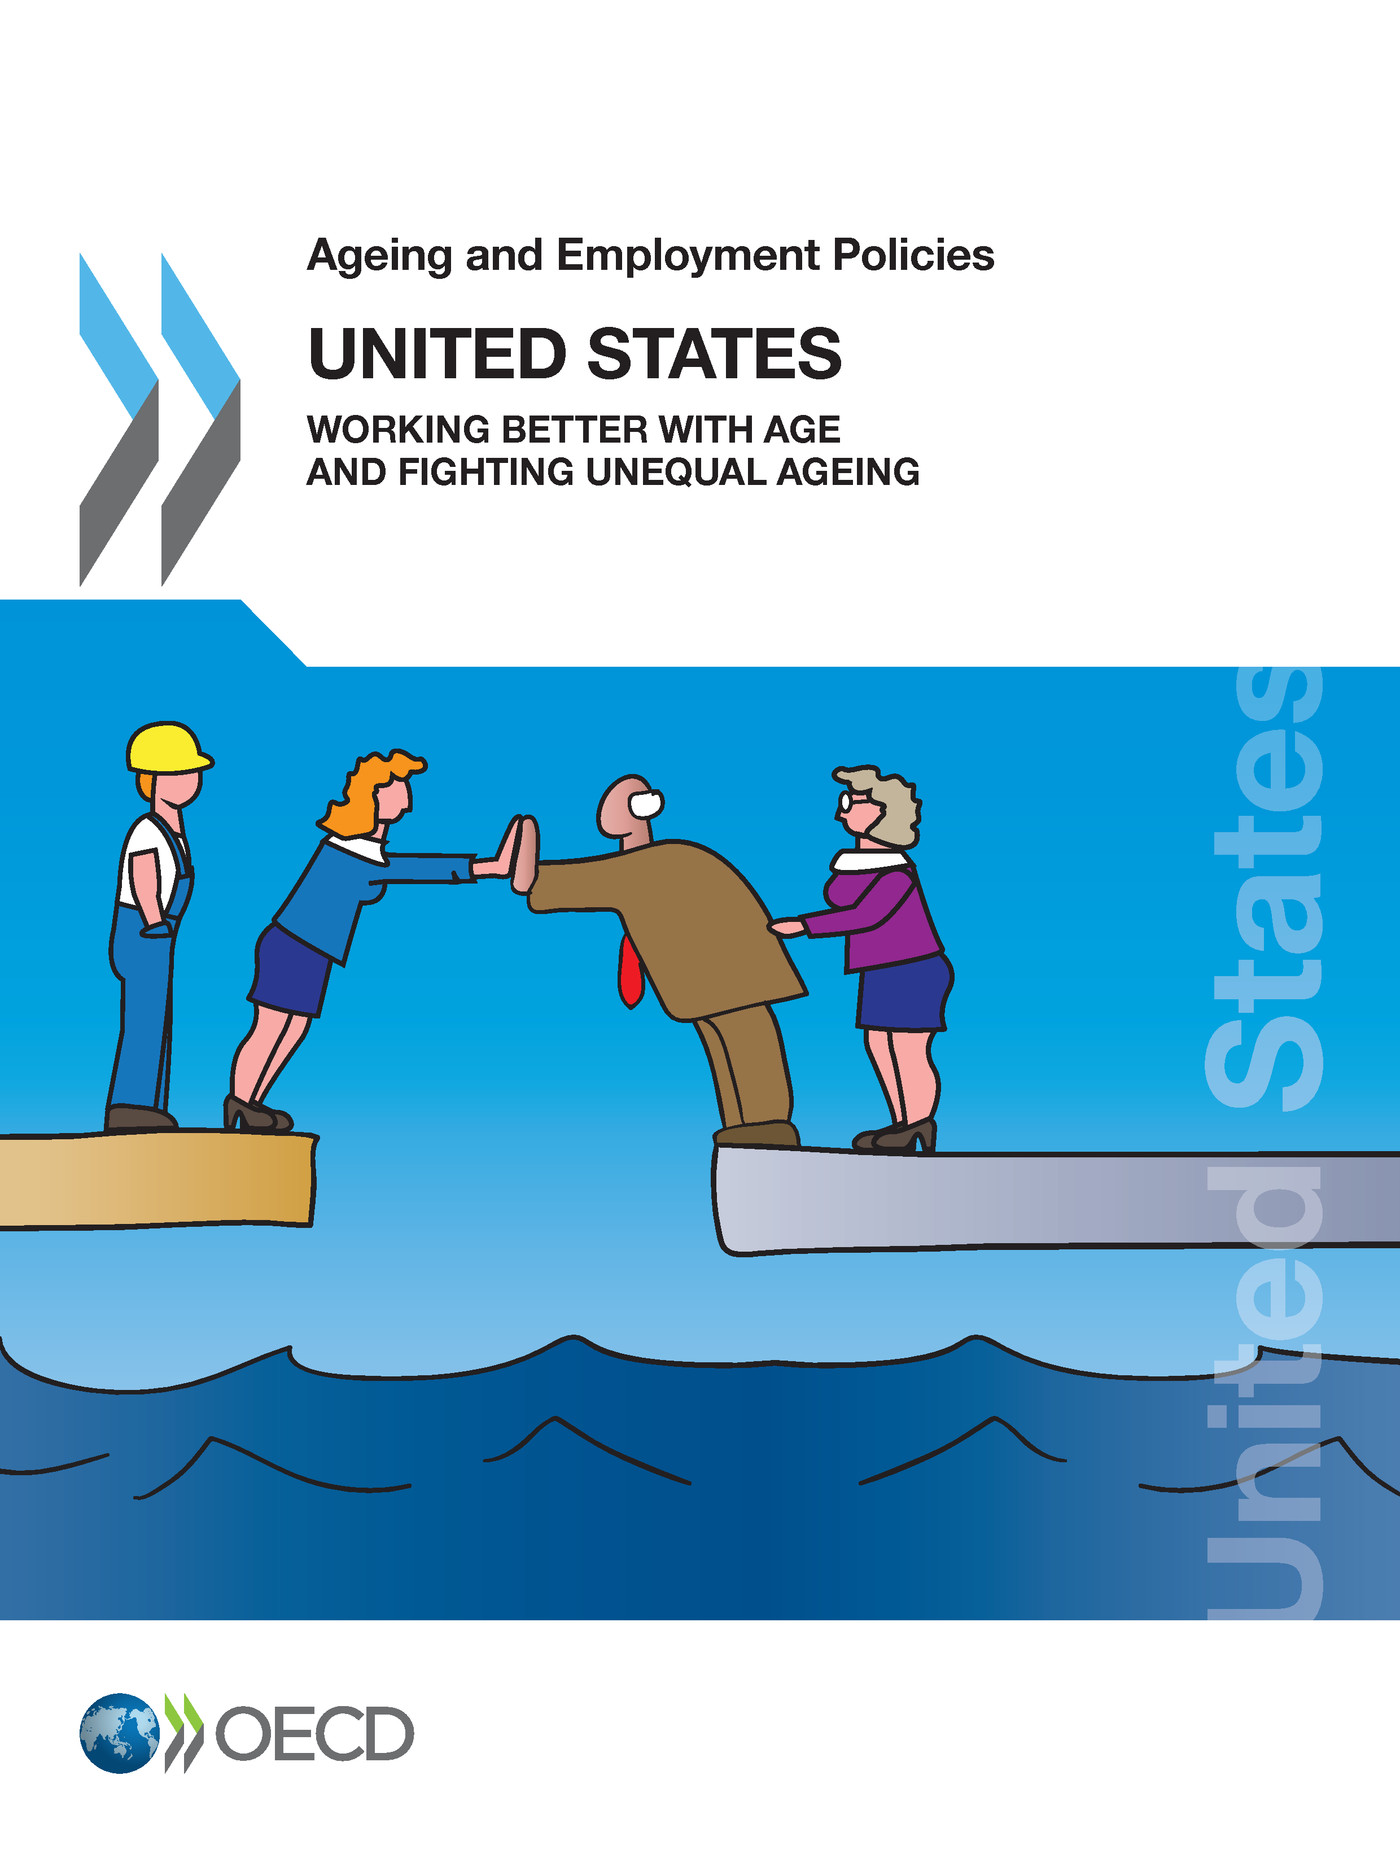 Ageing and Employment Policies: United States 2018 -  Collectif - OCDE / OECD